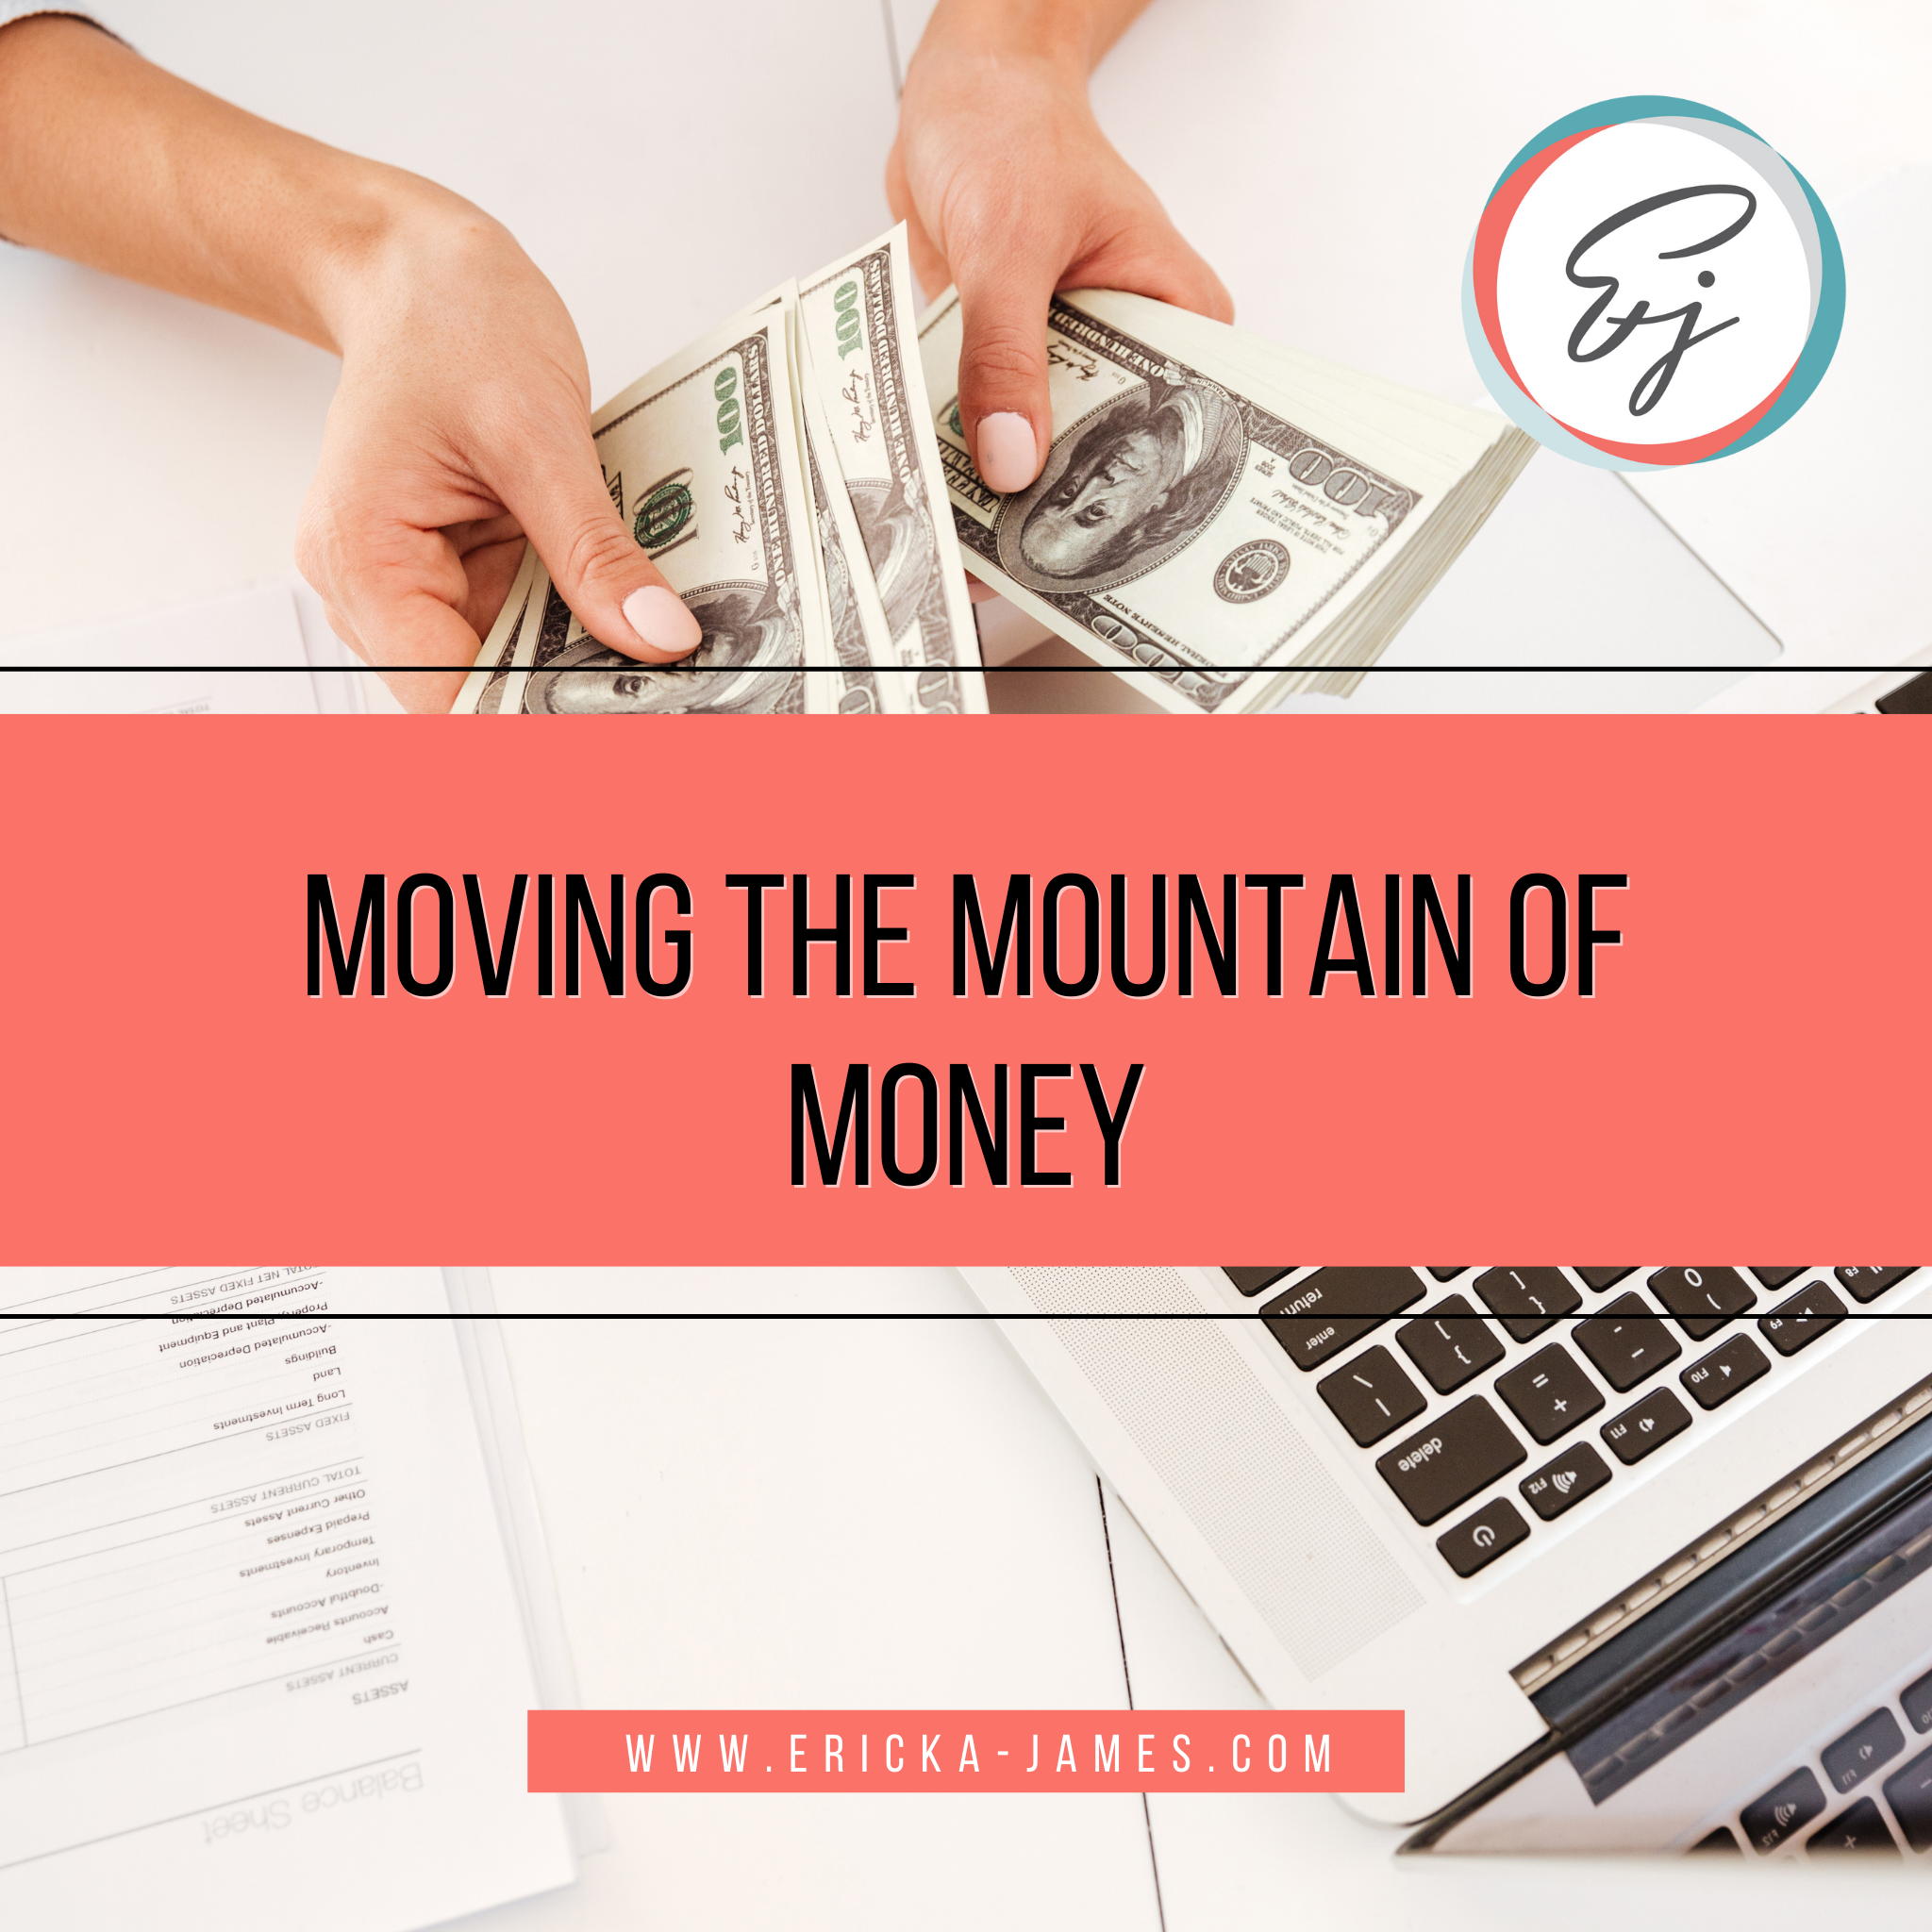 Moving the Mountain of Money Class